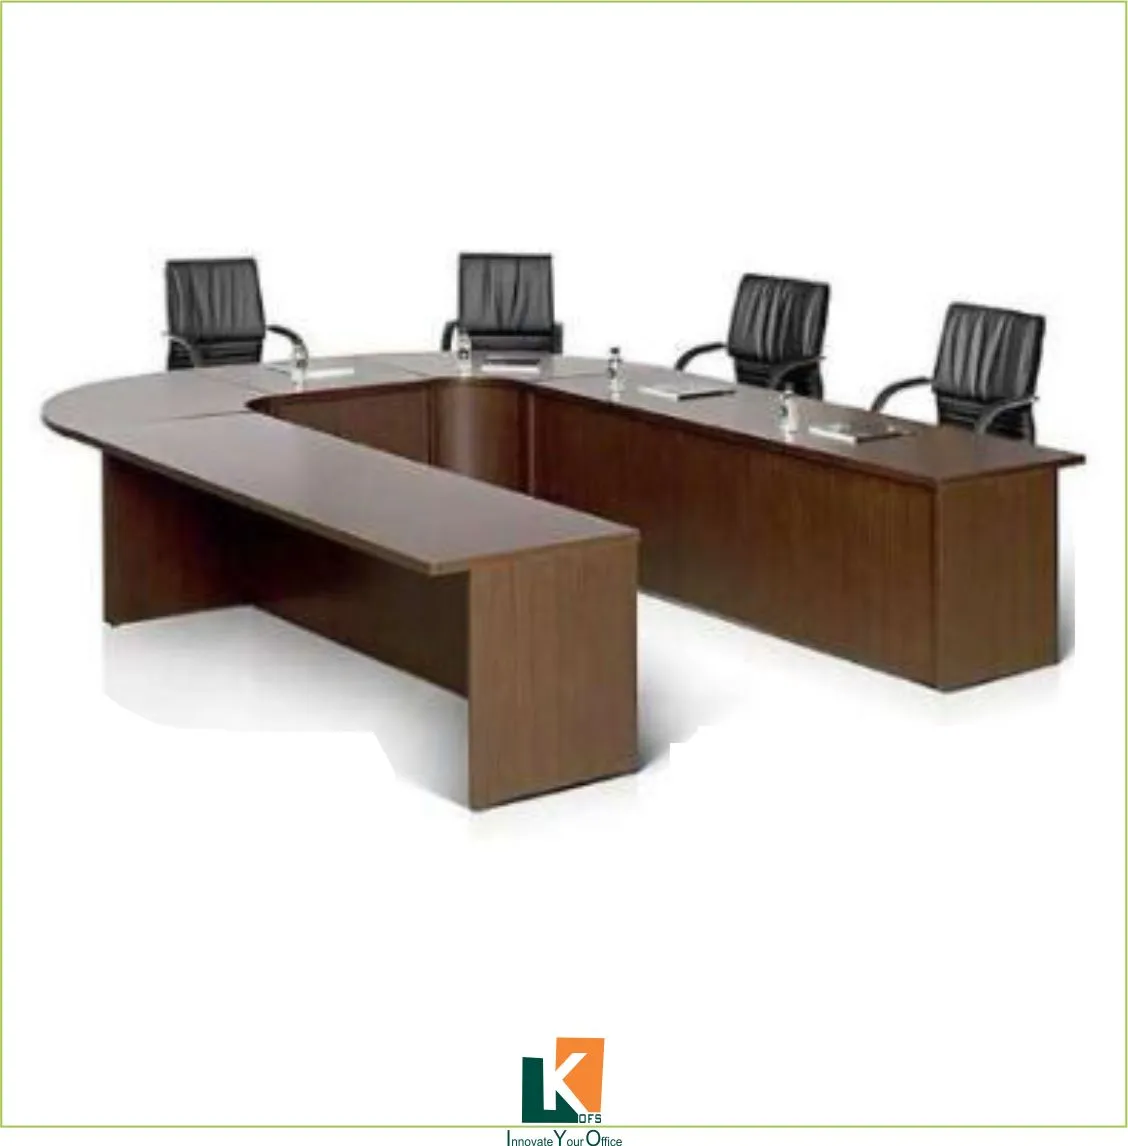 Modular conference table